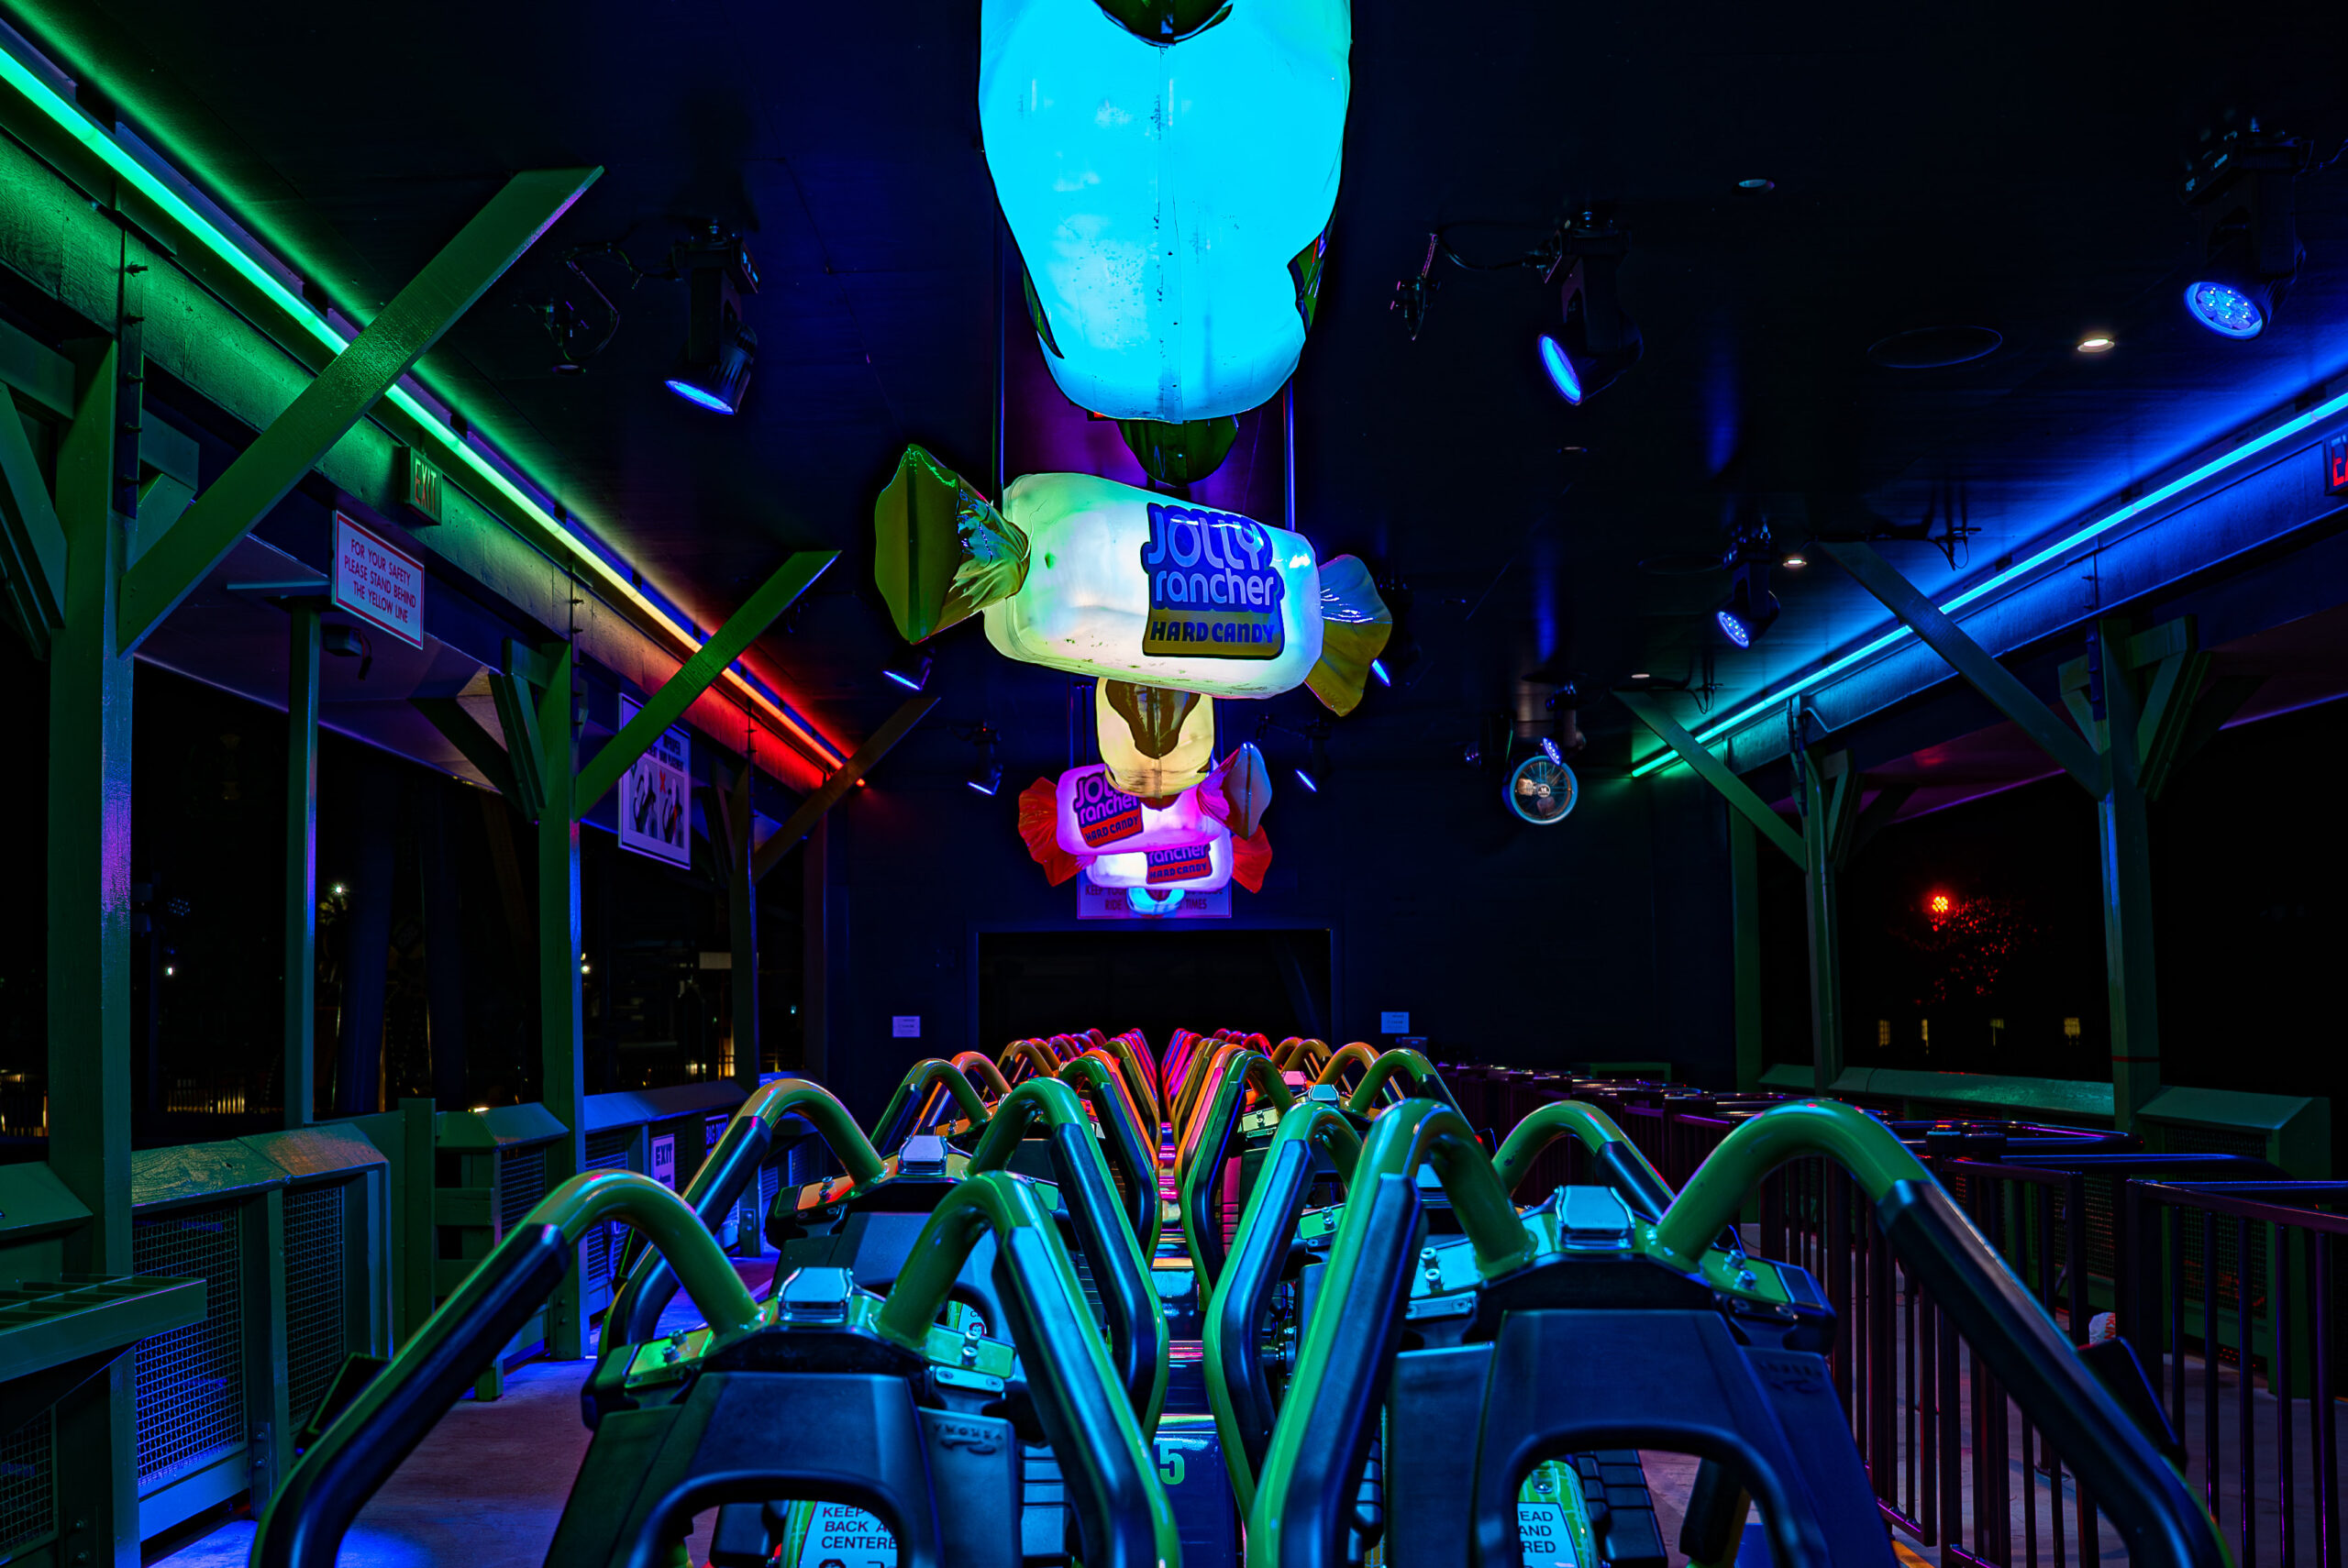 An Amusement Park Ride With Giant Lit Up Neon Jolly Ranchers